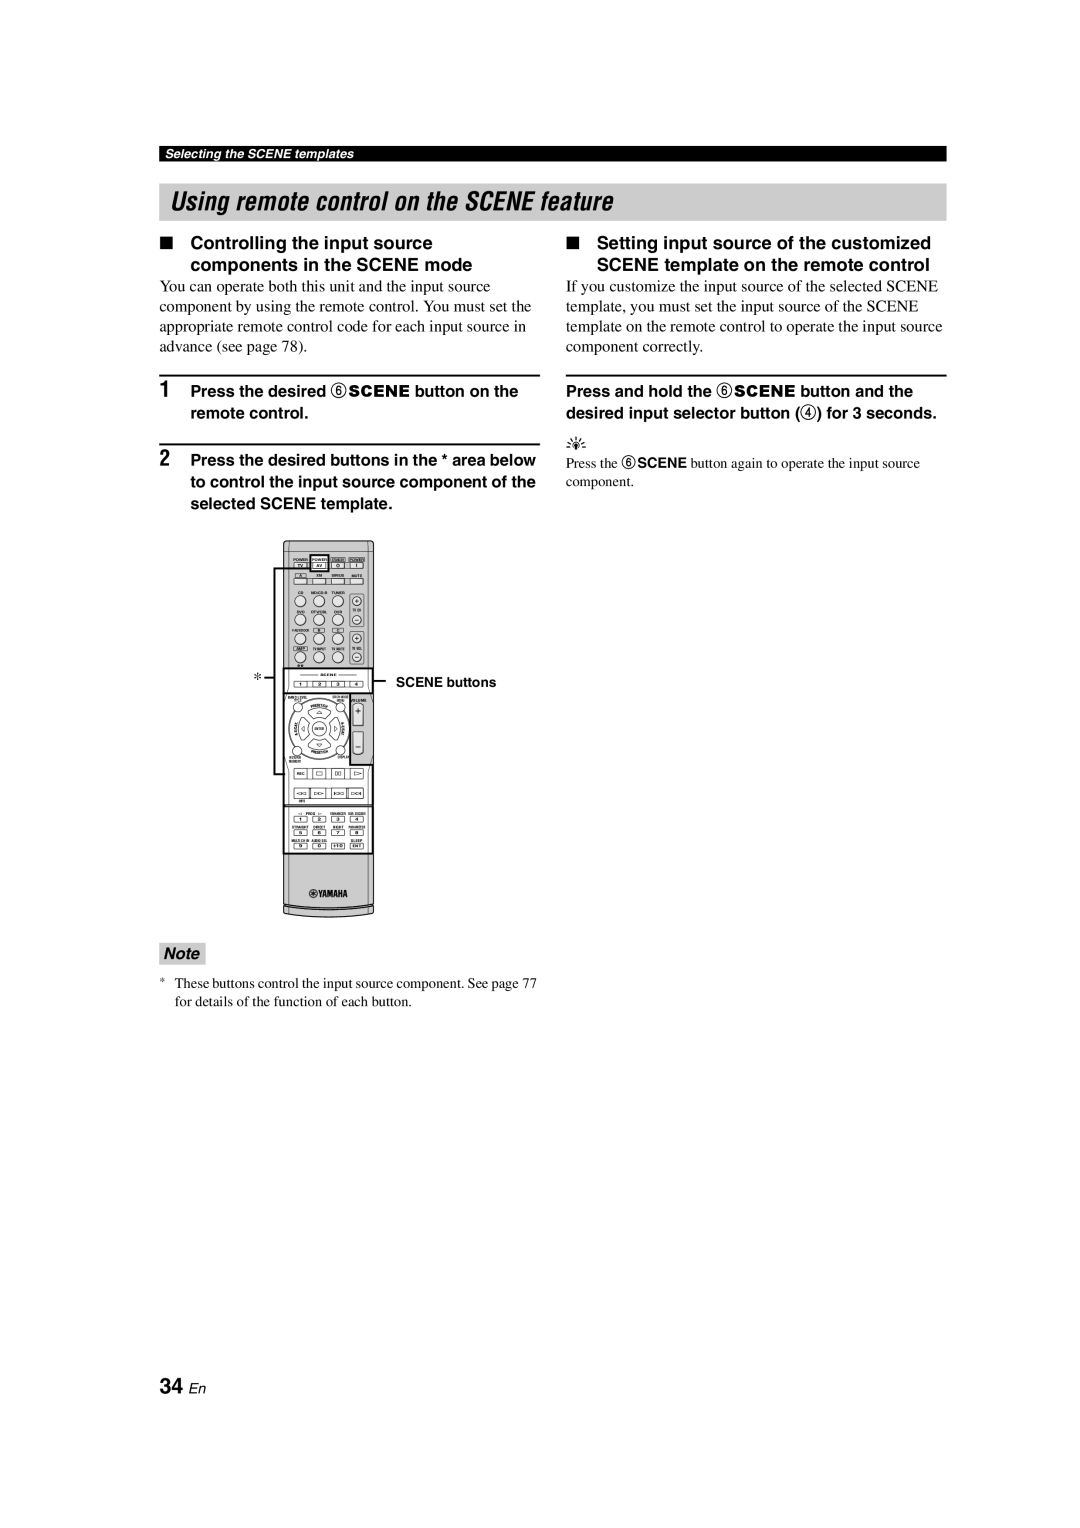 Yamaha HTR-6150 owner manual Using remote control on the SCENE feature, 34 En, Controlling the input source 